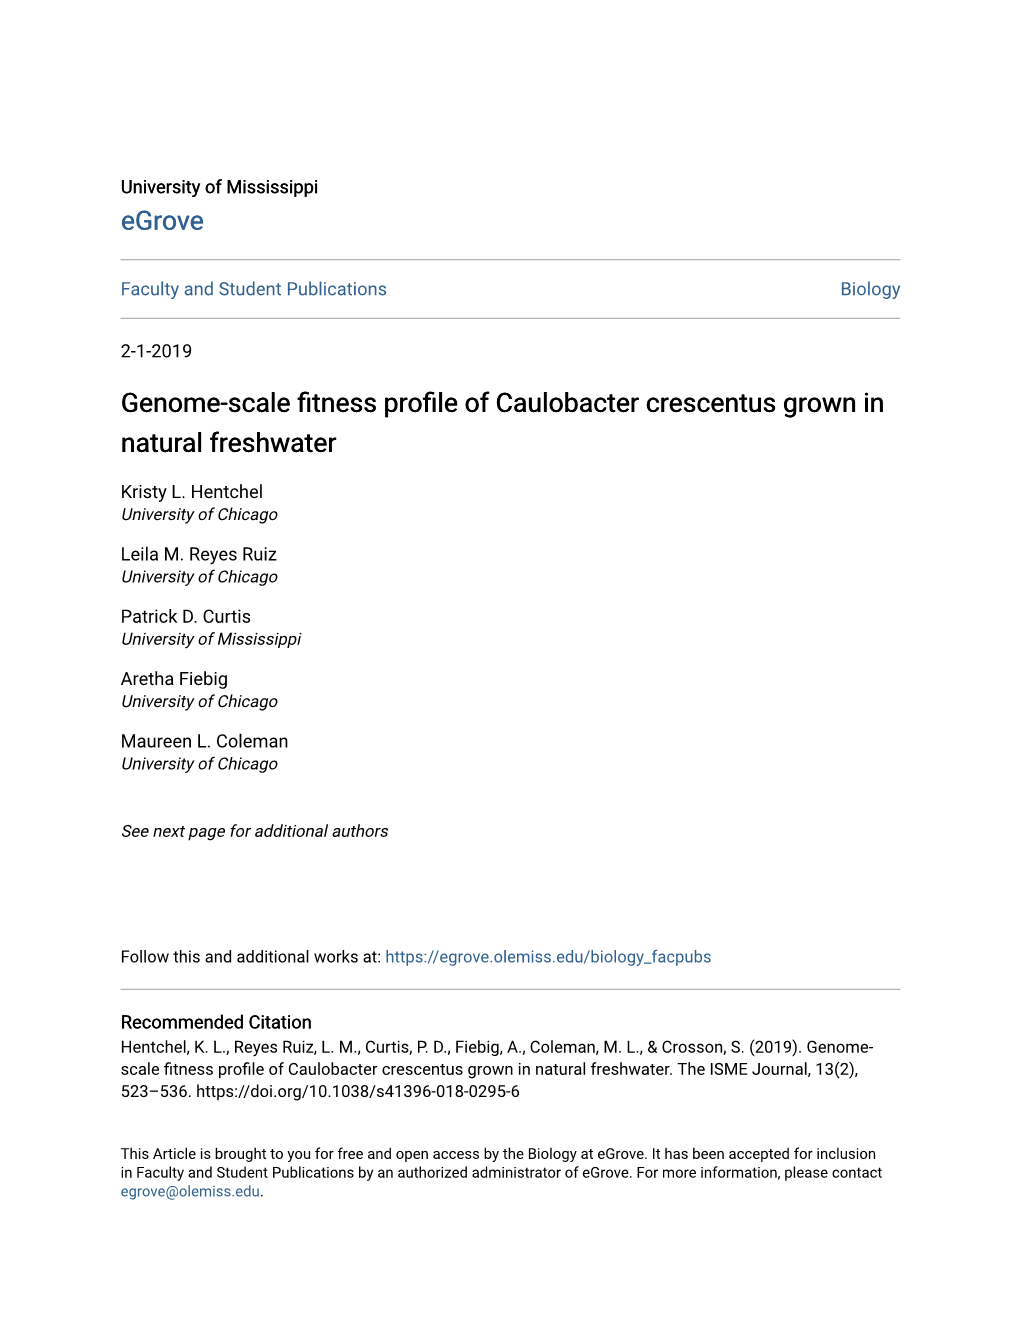 Genome-Scale Fitness Profile of Caulobacter Crescentus Grown in Natural Freshwater